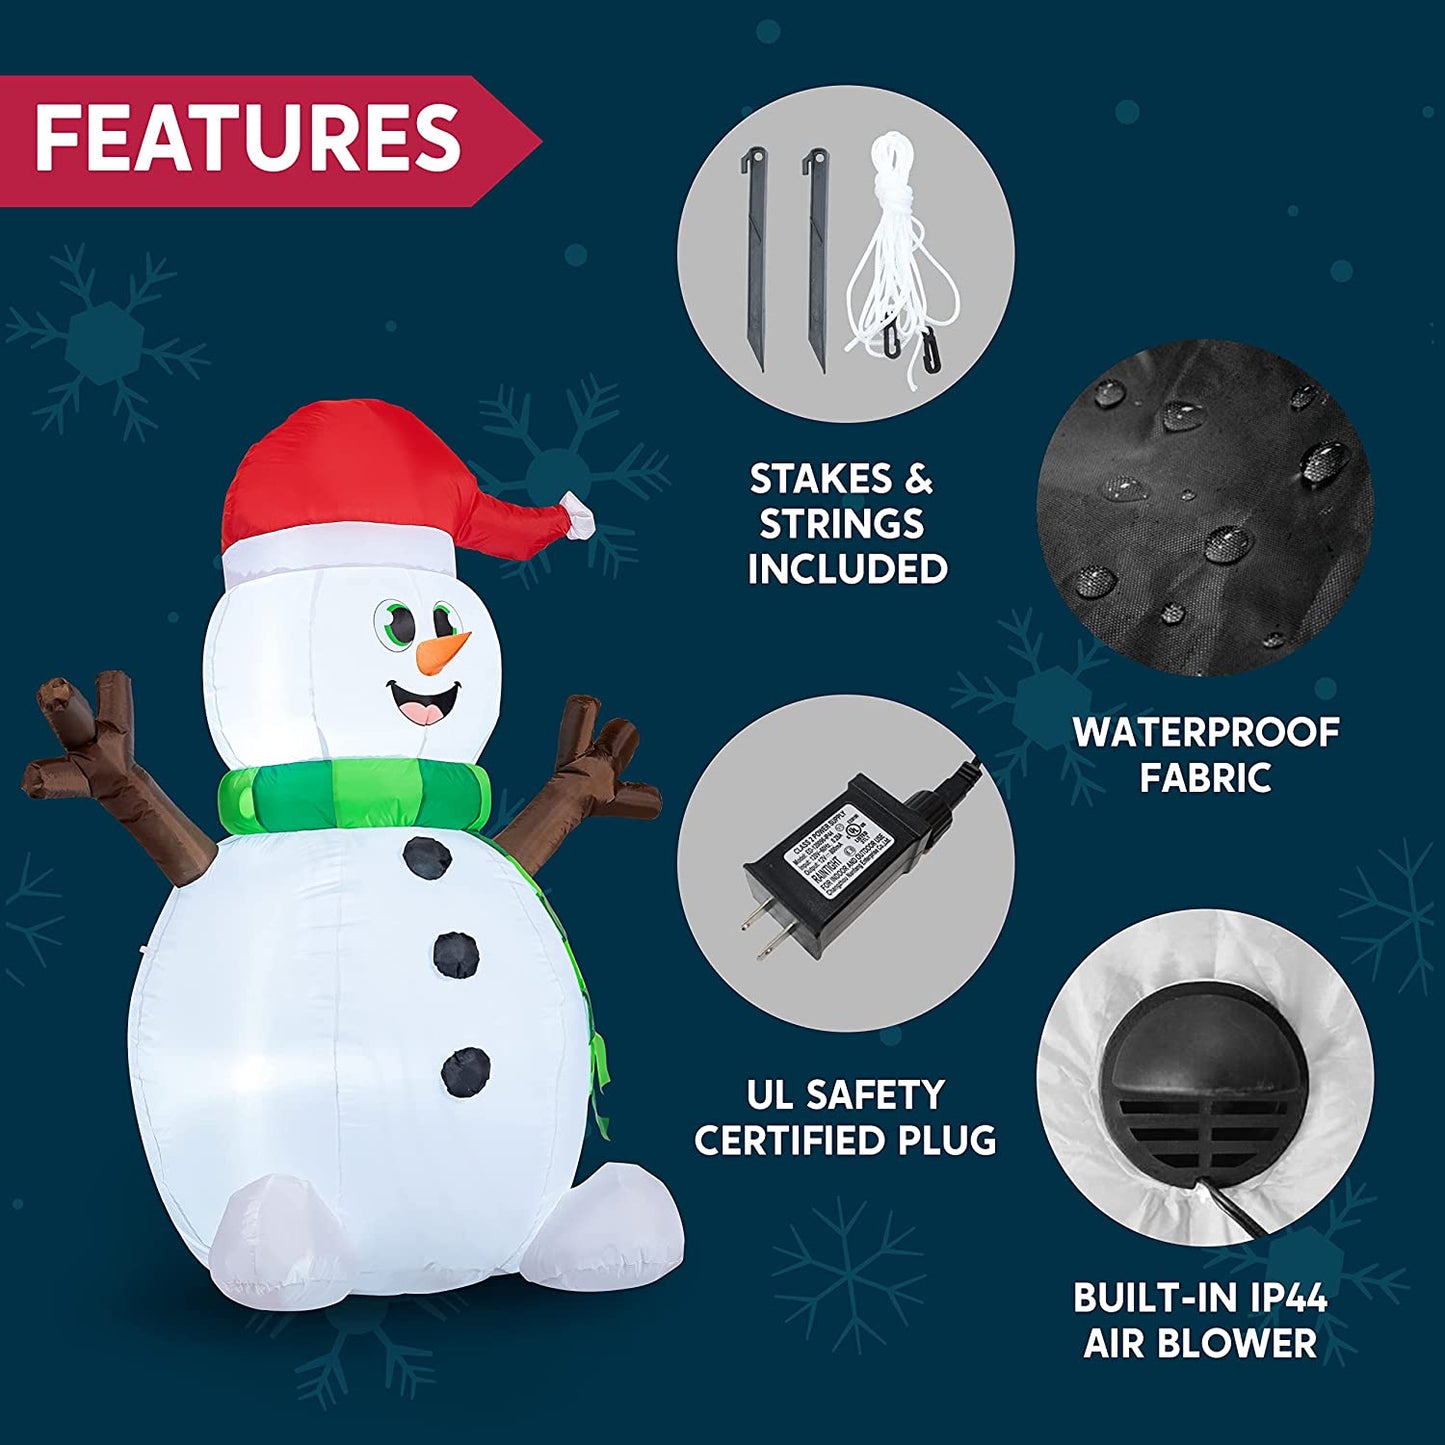 Tall Holiday Snowman Inflatable (5 ft)